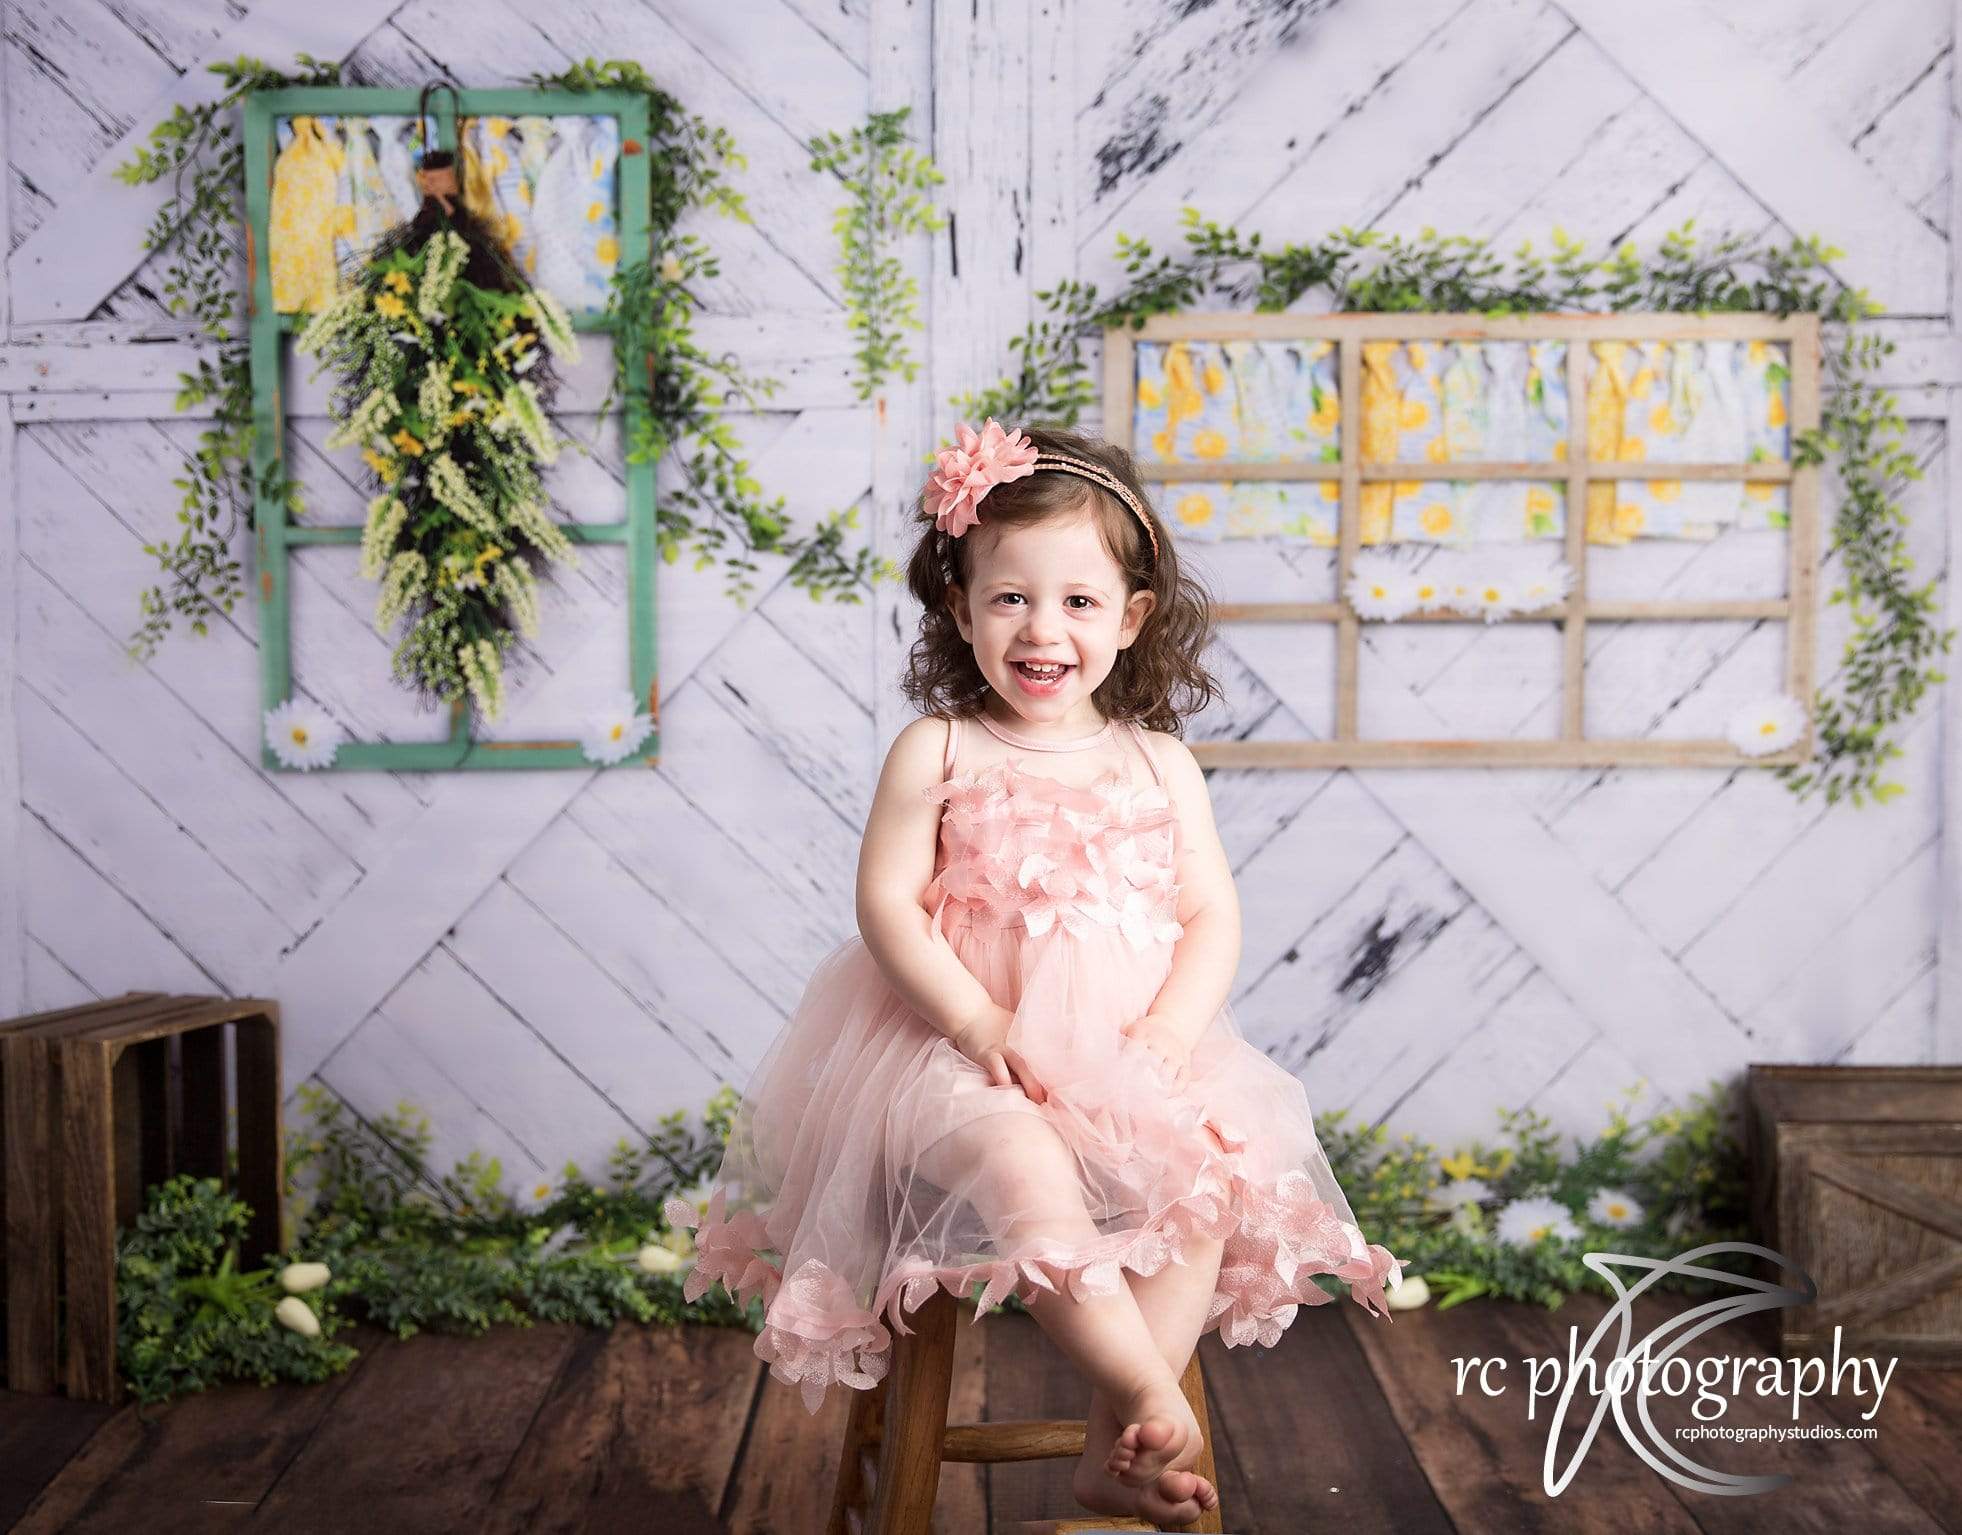 Kate Retro Wood Lemon color and Daisies  Spring Backdrop